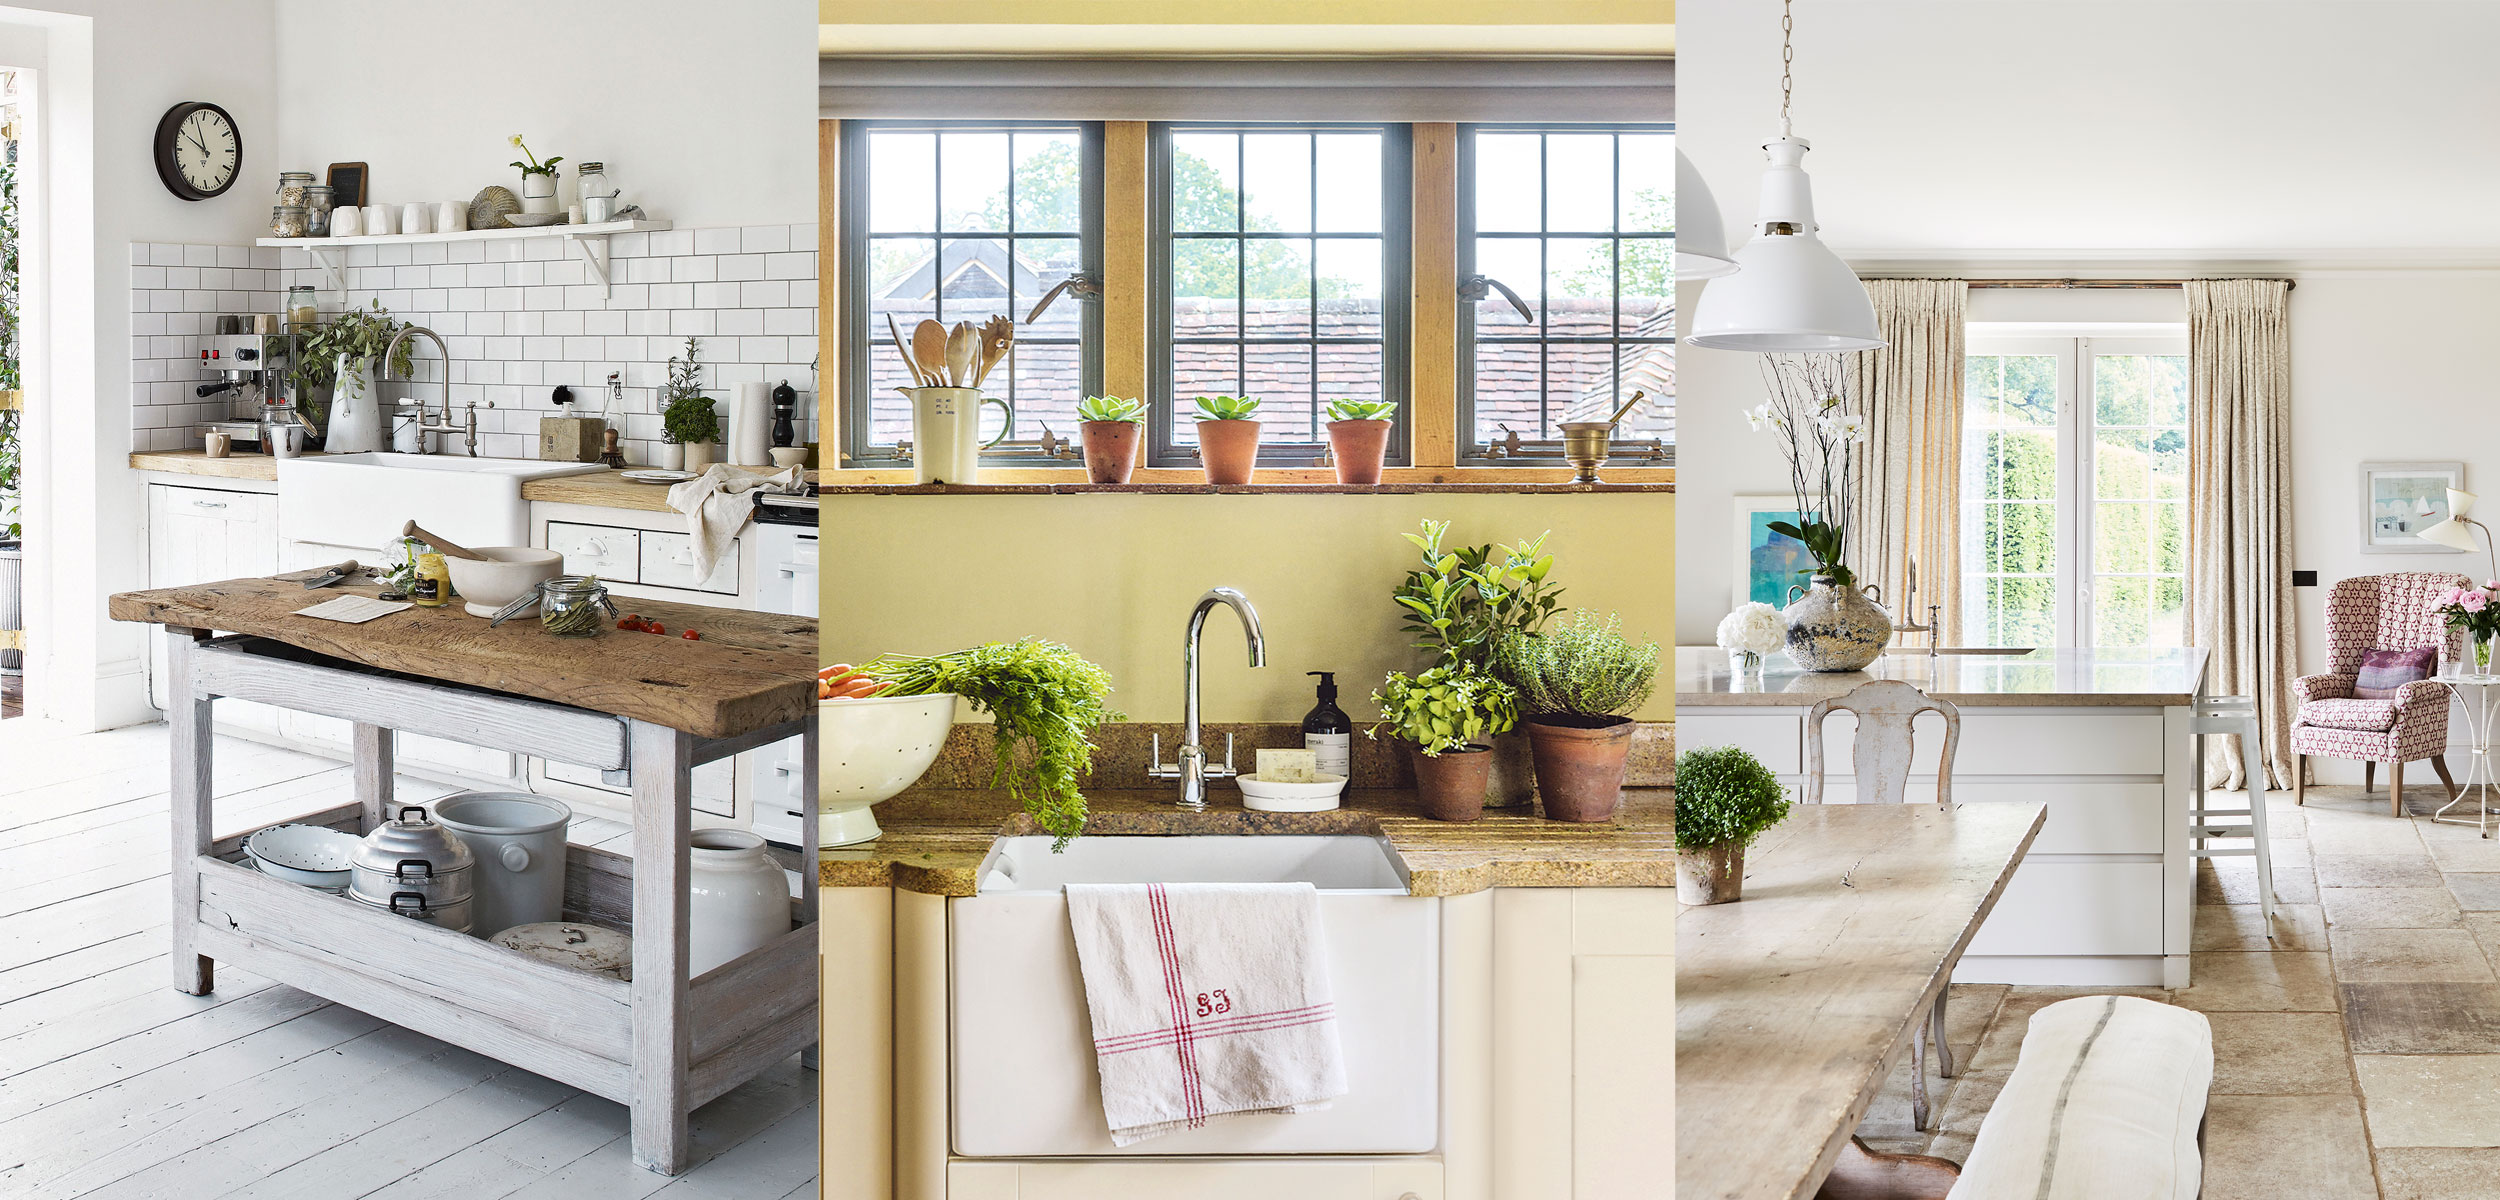 French country kitchen ideas: 60 chic spaces you'll love